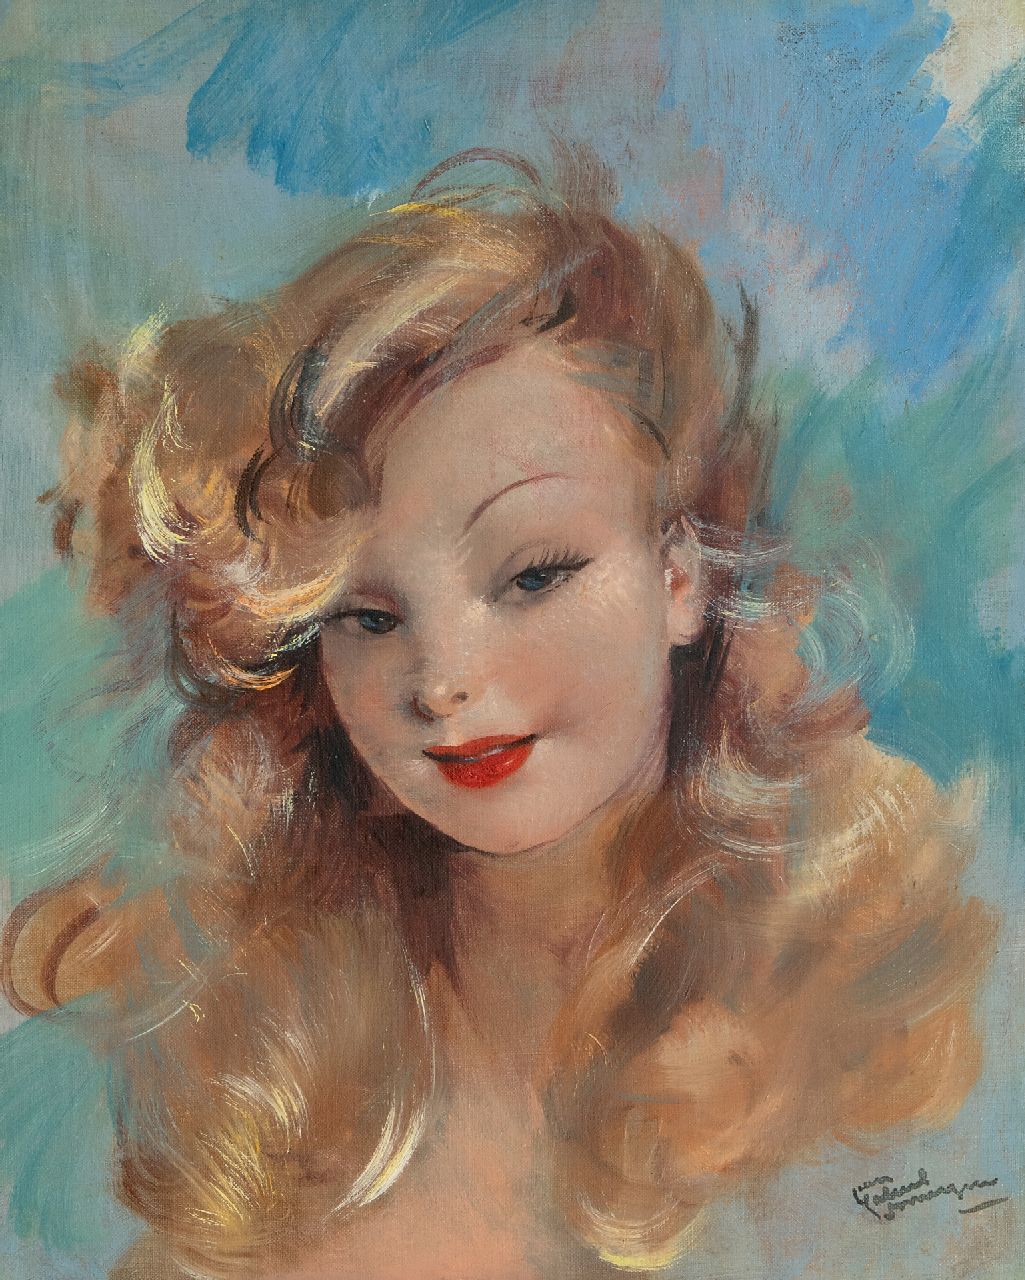 Domergue J.G.  | Jean-Gabriel Domergue | Paintings offered for sale | Portrait of Mademoiselle Marisia, oil on canvas 41.0 x 33.0 cm, signed l.r.